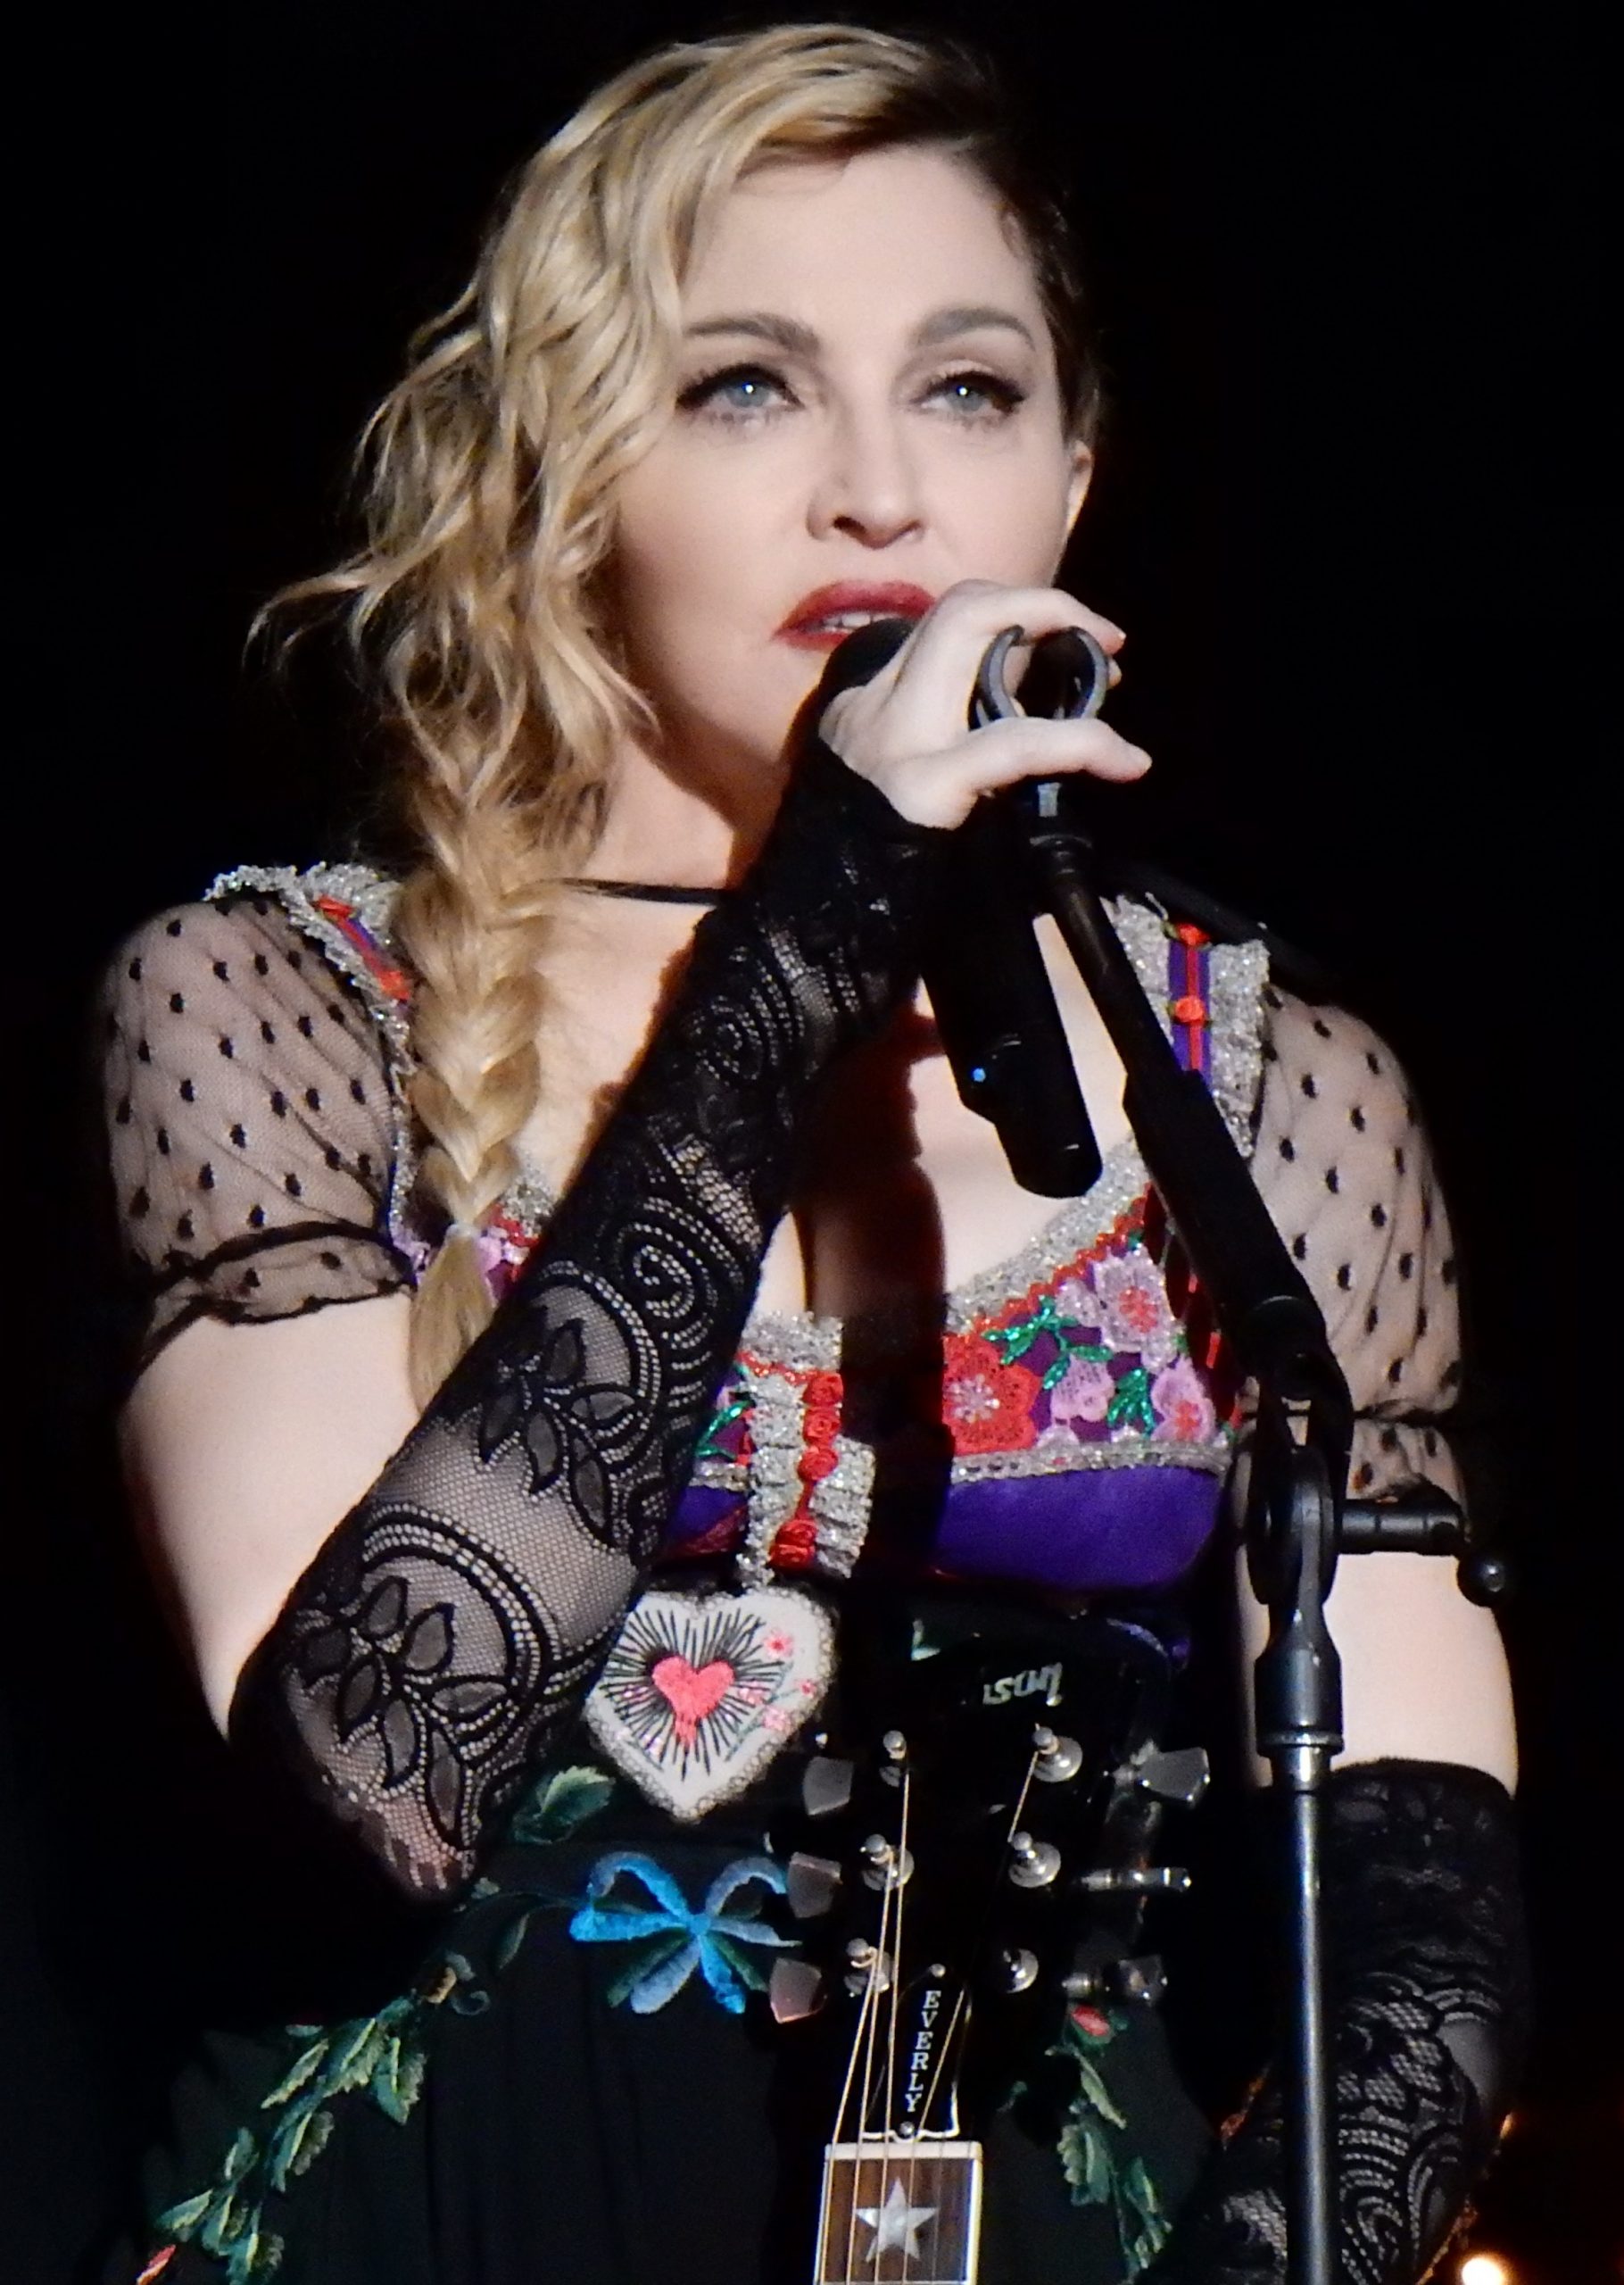 madonna-joins-with-reform-alliance-to-donate-100000-masks-to-jails-prisons